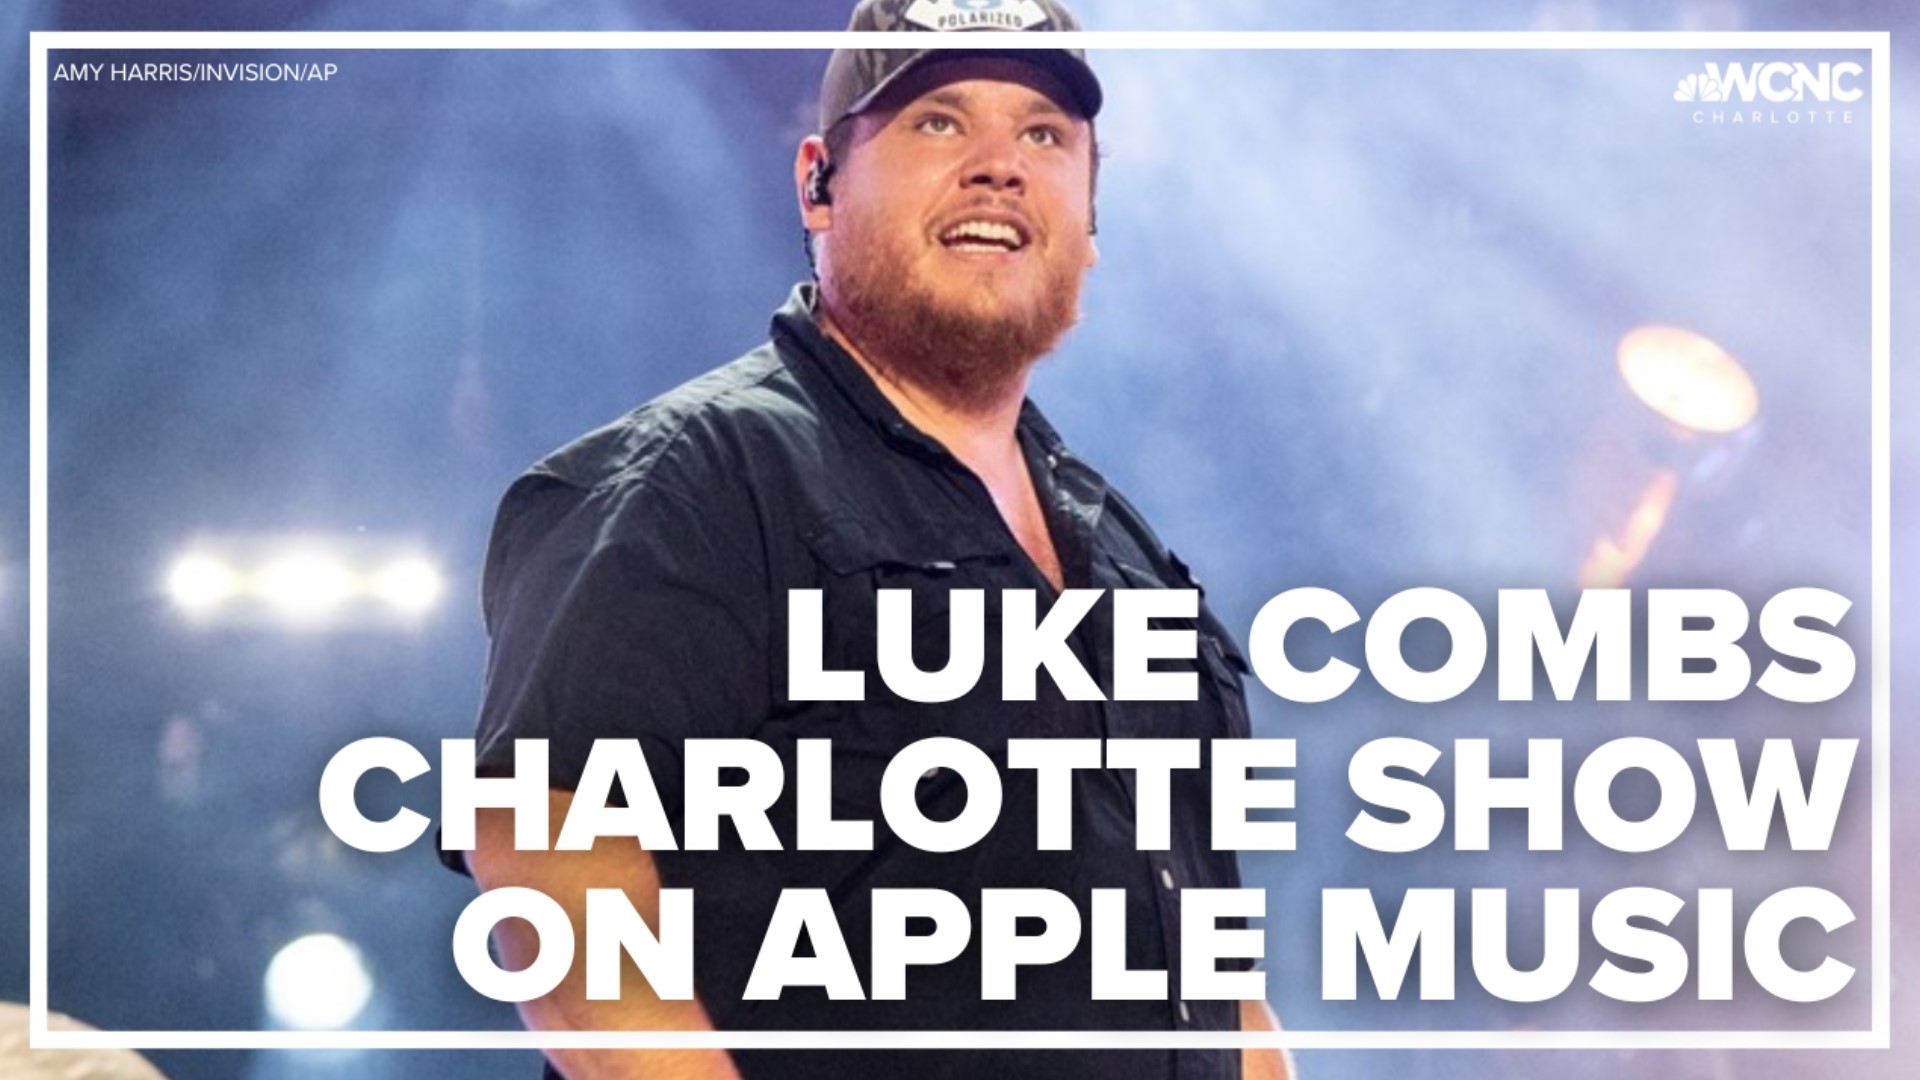 You can stream Luke Combs' Charlotte show on Apple Music starting tonight at 10 pm.